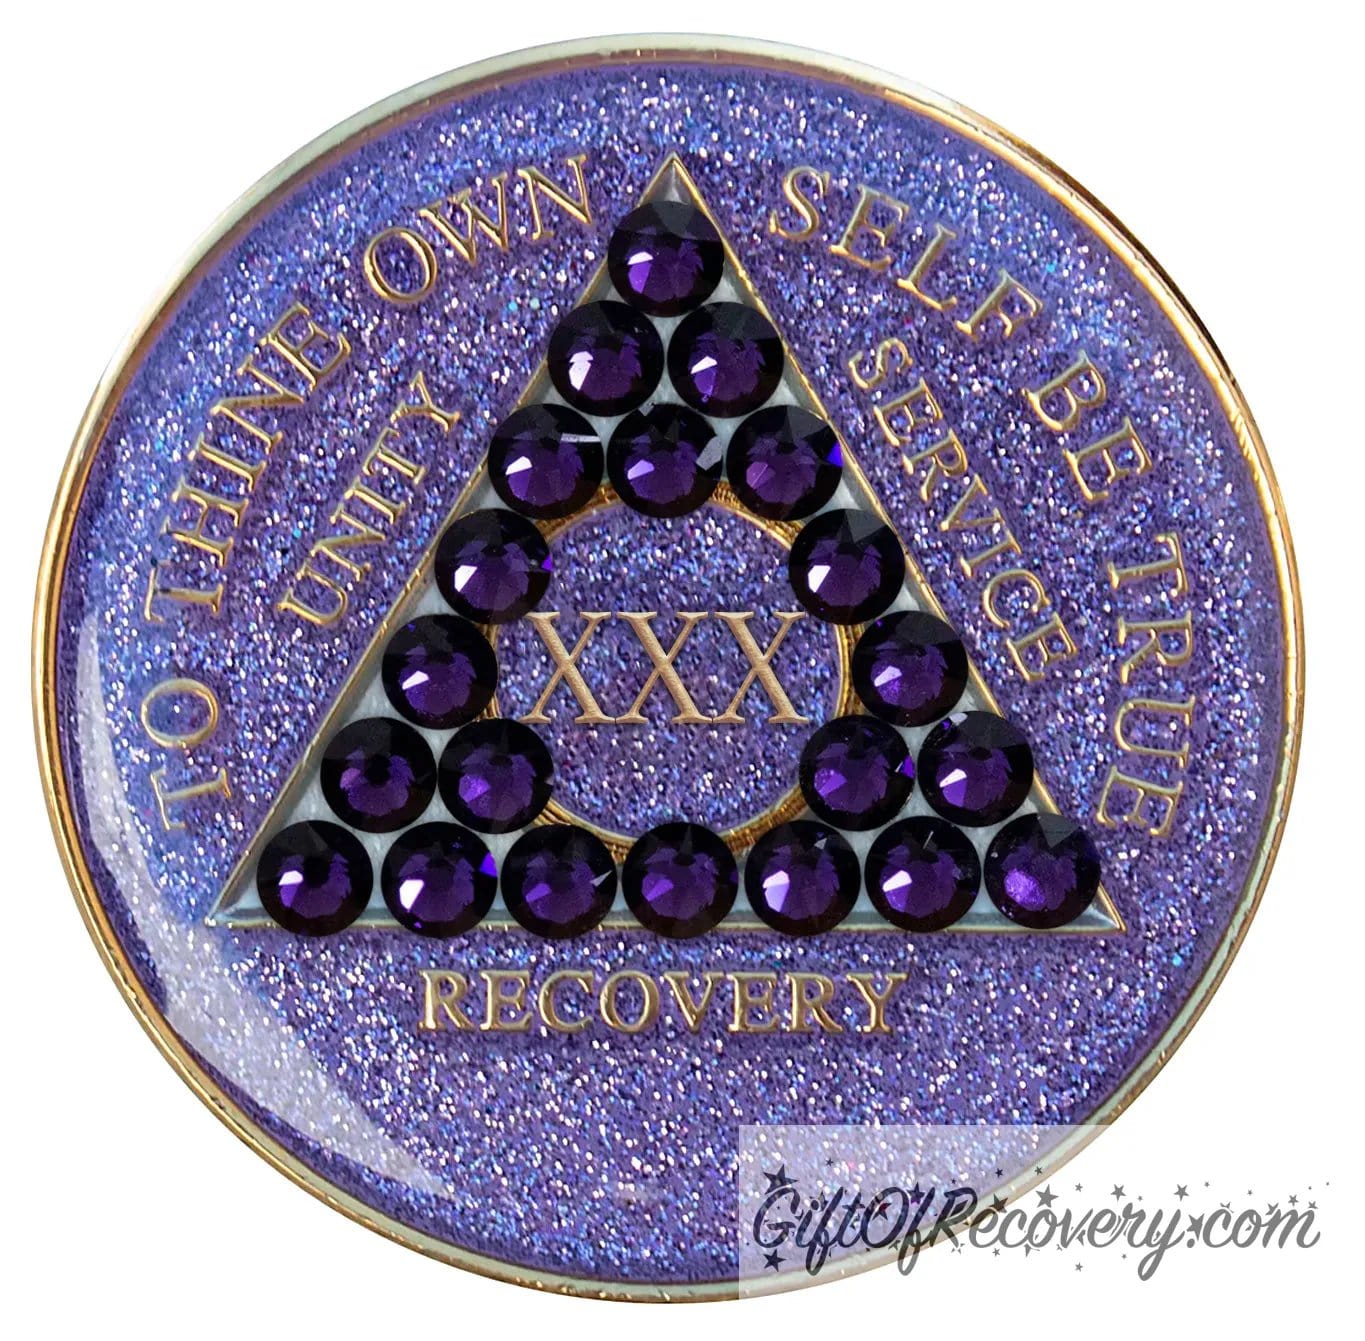 30 year glitter purple AA medallion with 21 purple velvet genuine crystals, that create the triangle in middle, and to thine own self be true, unity, service, recovery, the roman numeral in the center of the circle triangle, along with the rim of the recovery medallion, are embossed in 14 gold plated brass, sealed in resin for glossy finish.